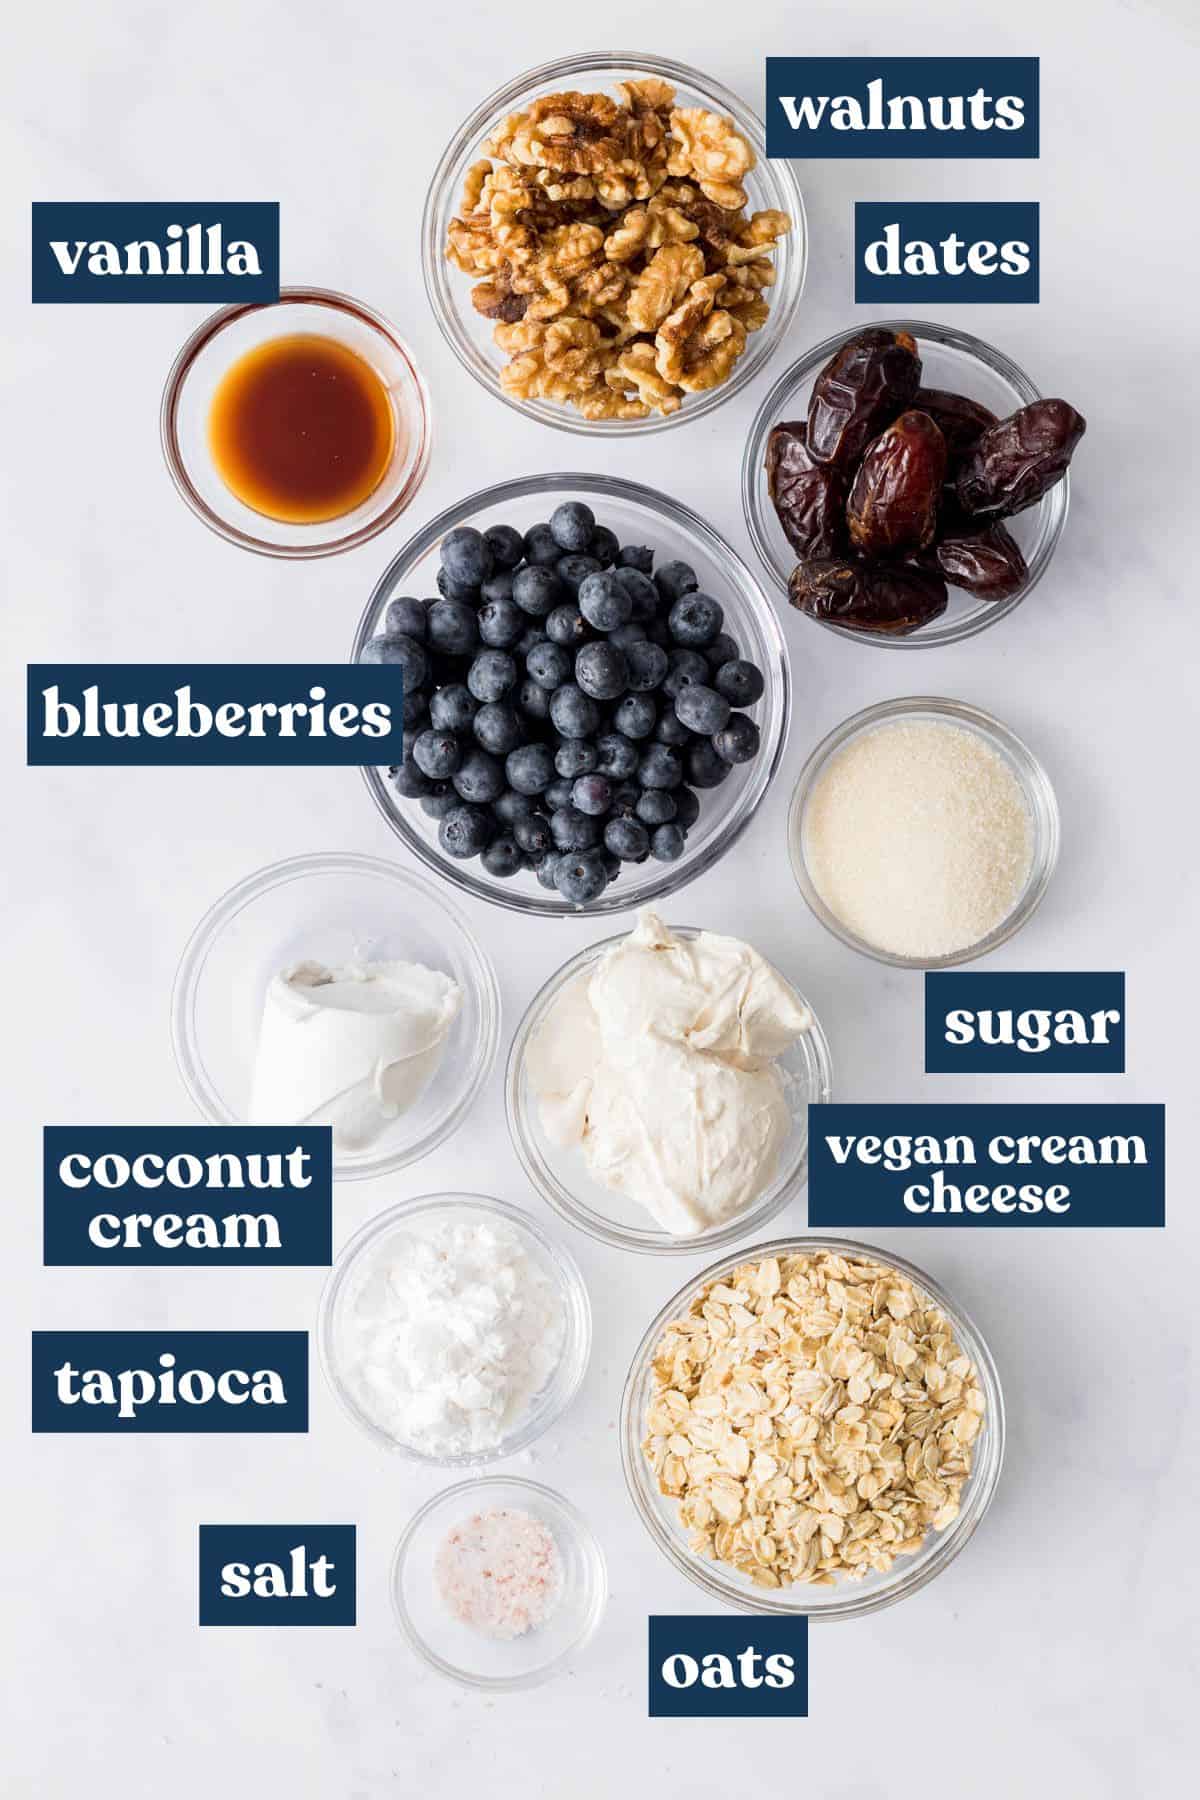 Ingredients needed to make vegan blueberry cheesecake measured and labeled.